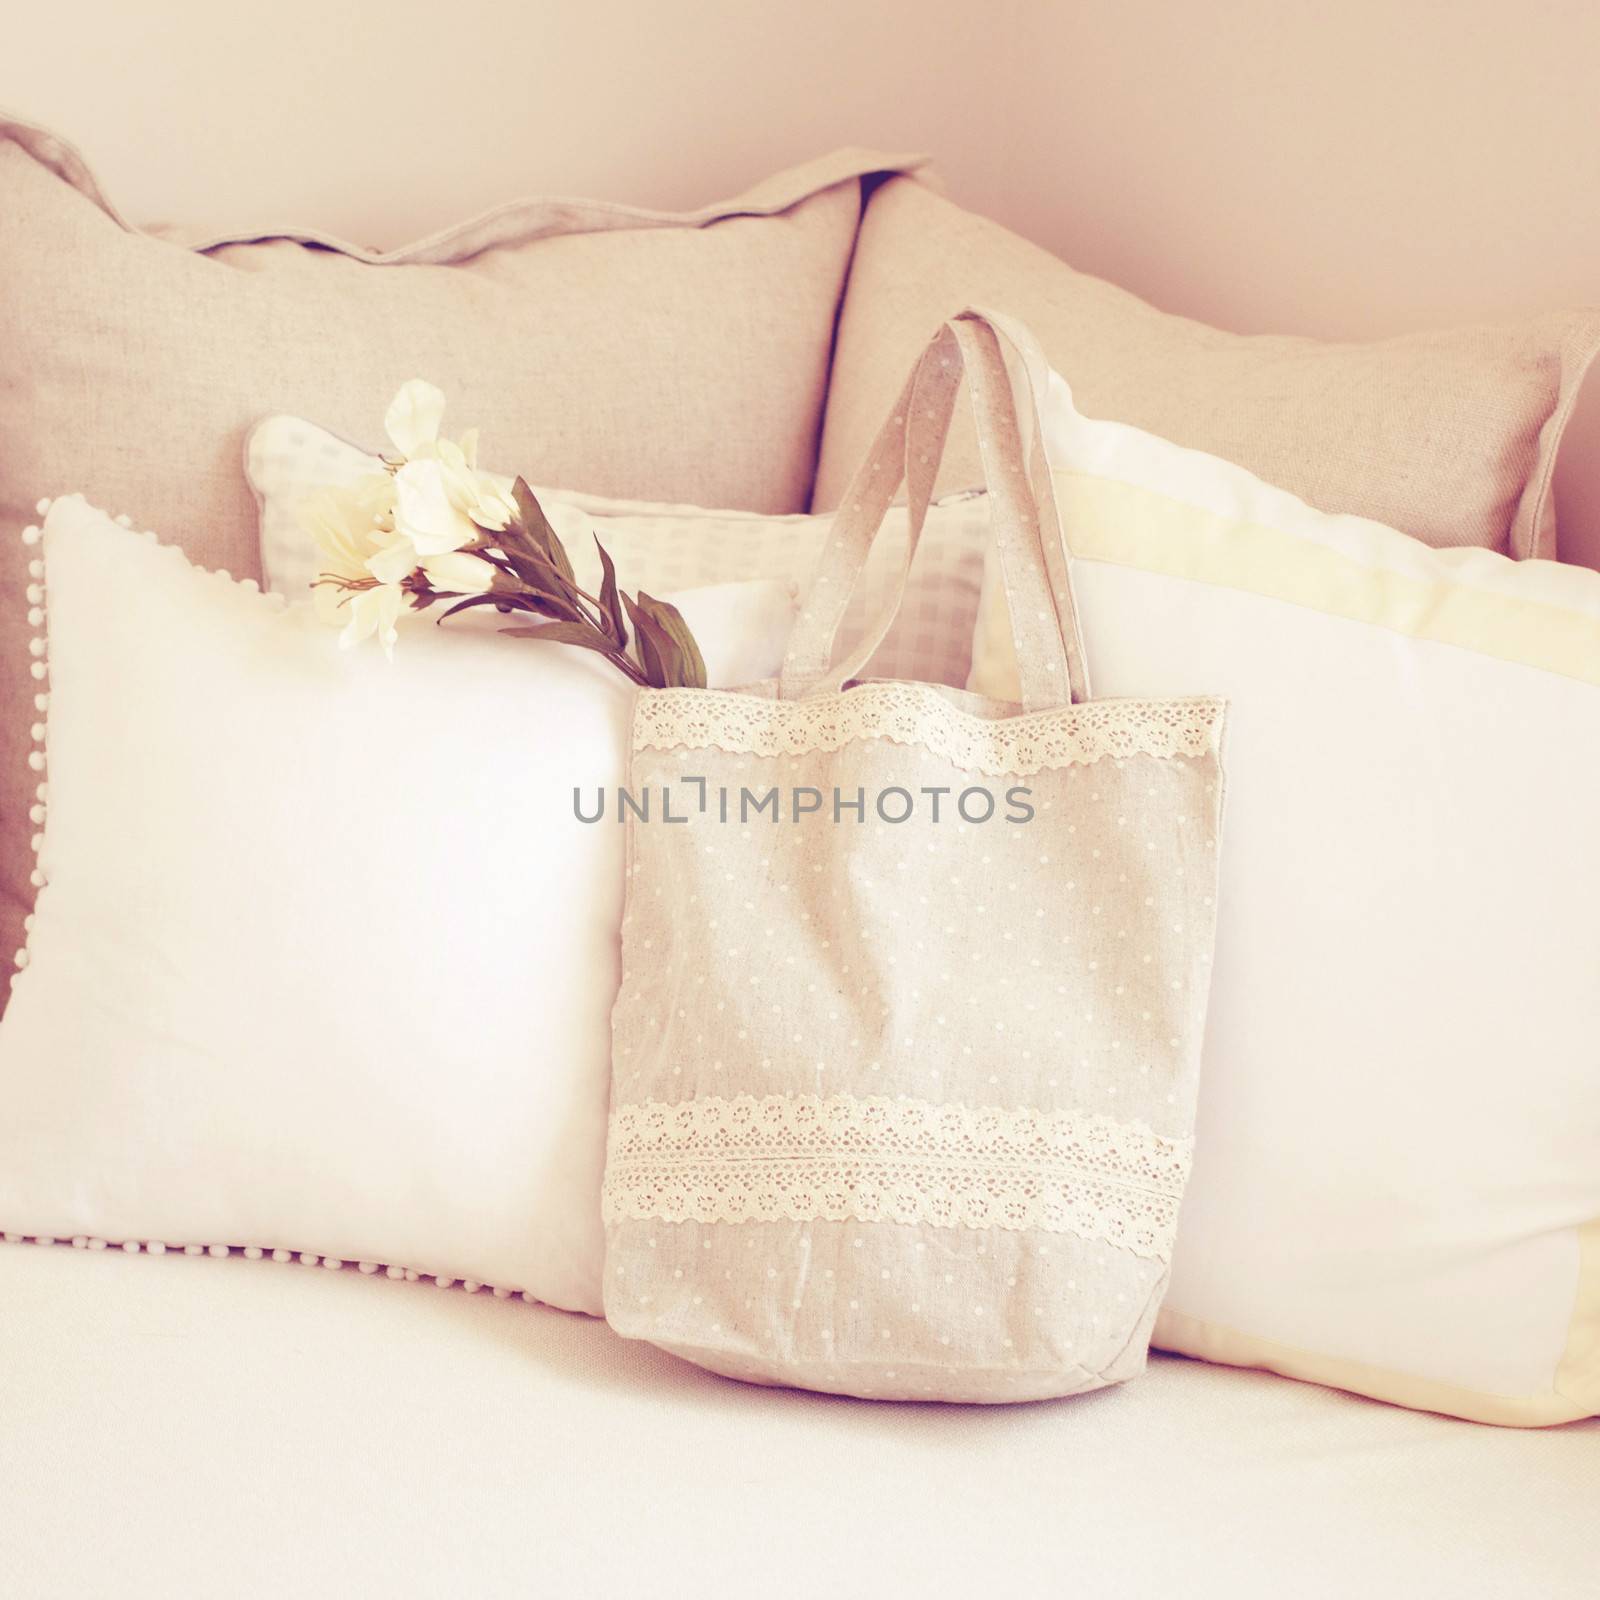 Cute tote bag and pillows on bed with retro filter effect by nuchylee